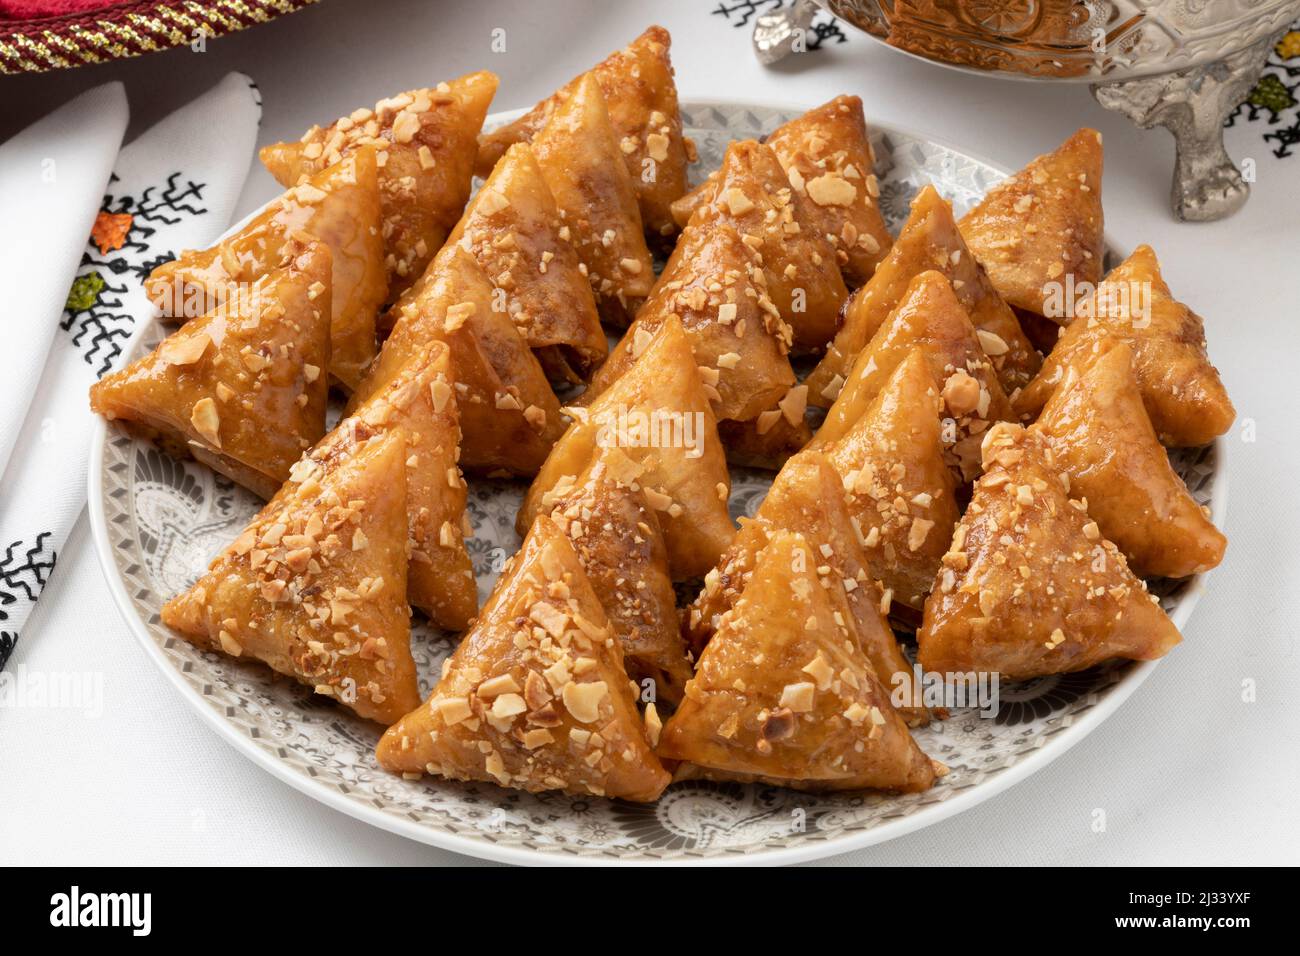 Dish with fresh traditional Almond briouats, coated in warm honey and filled with almond paste flavored with cinnamon and orange flower water close up Stock Photo